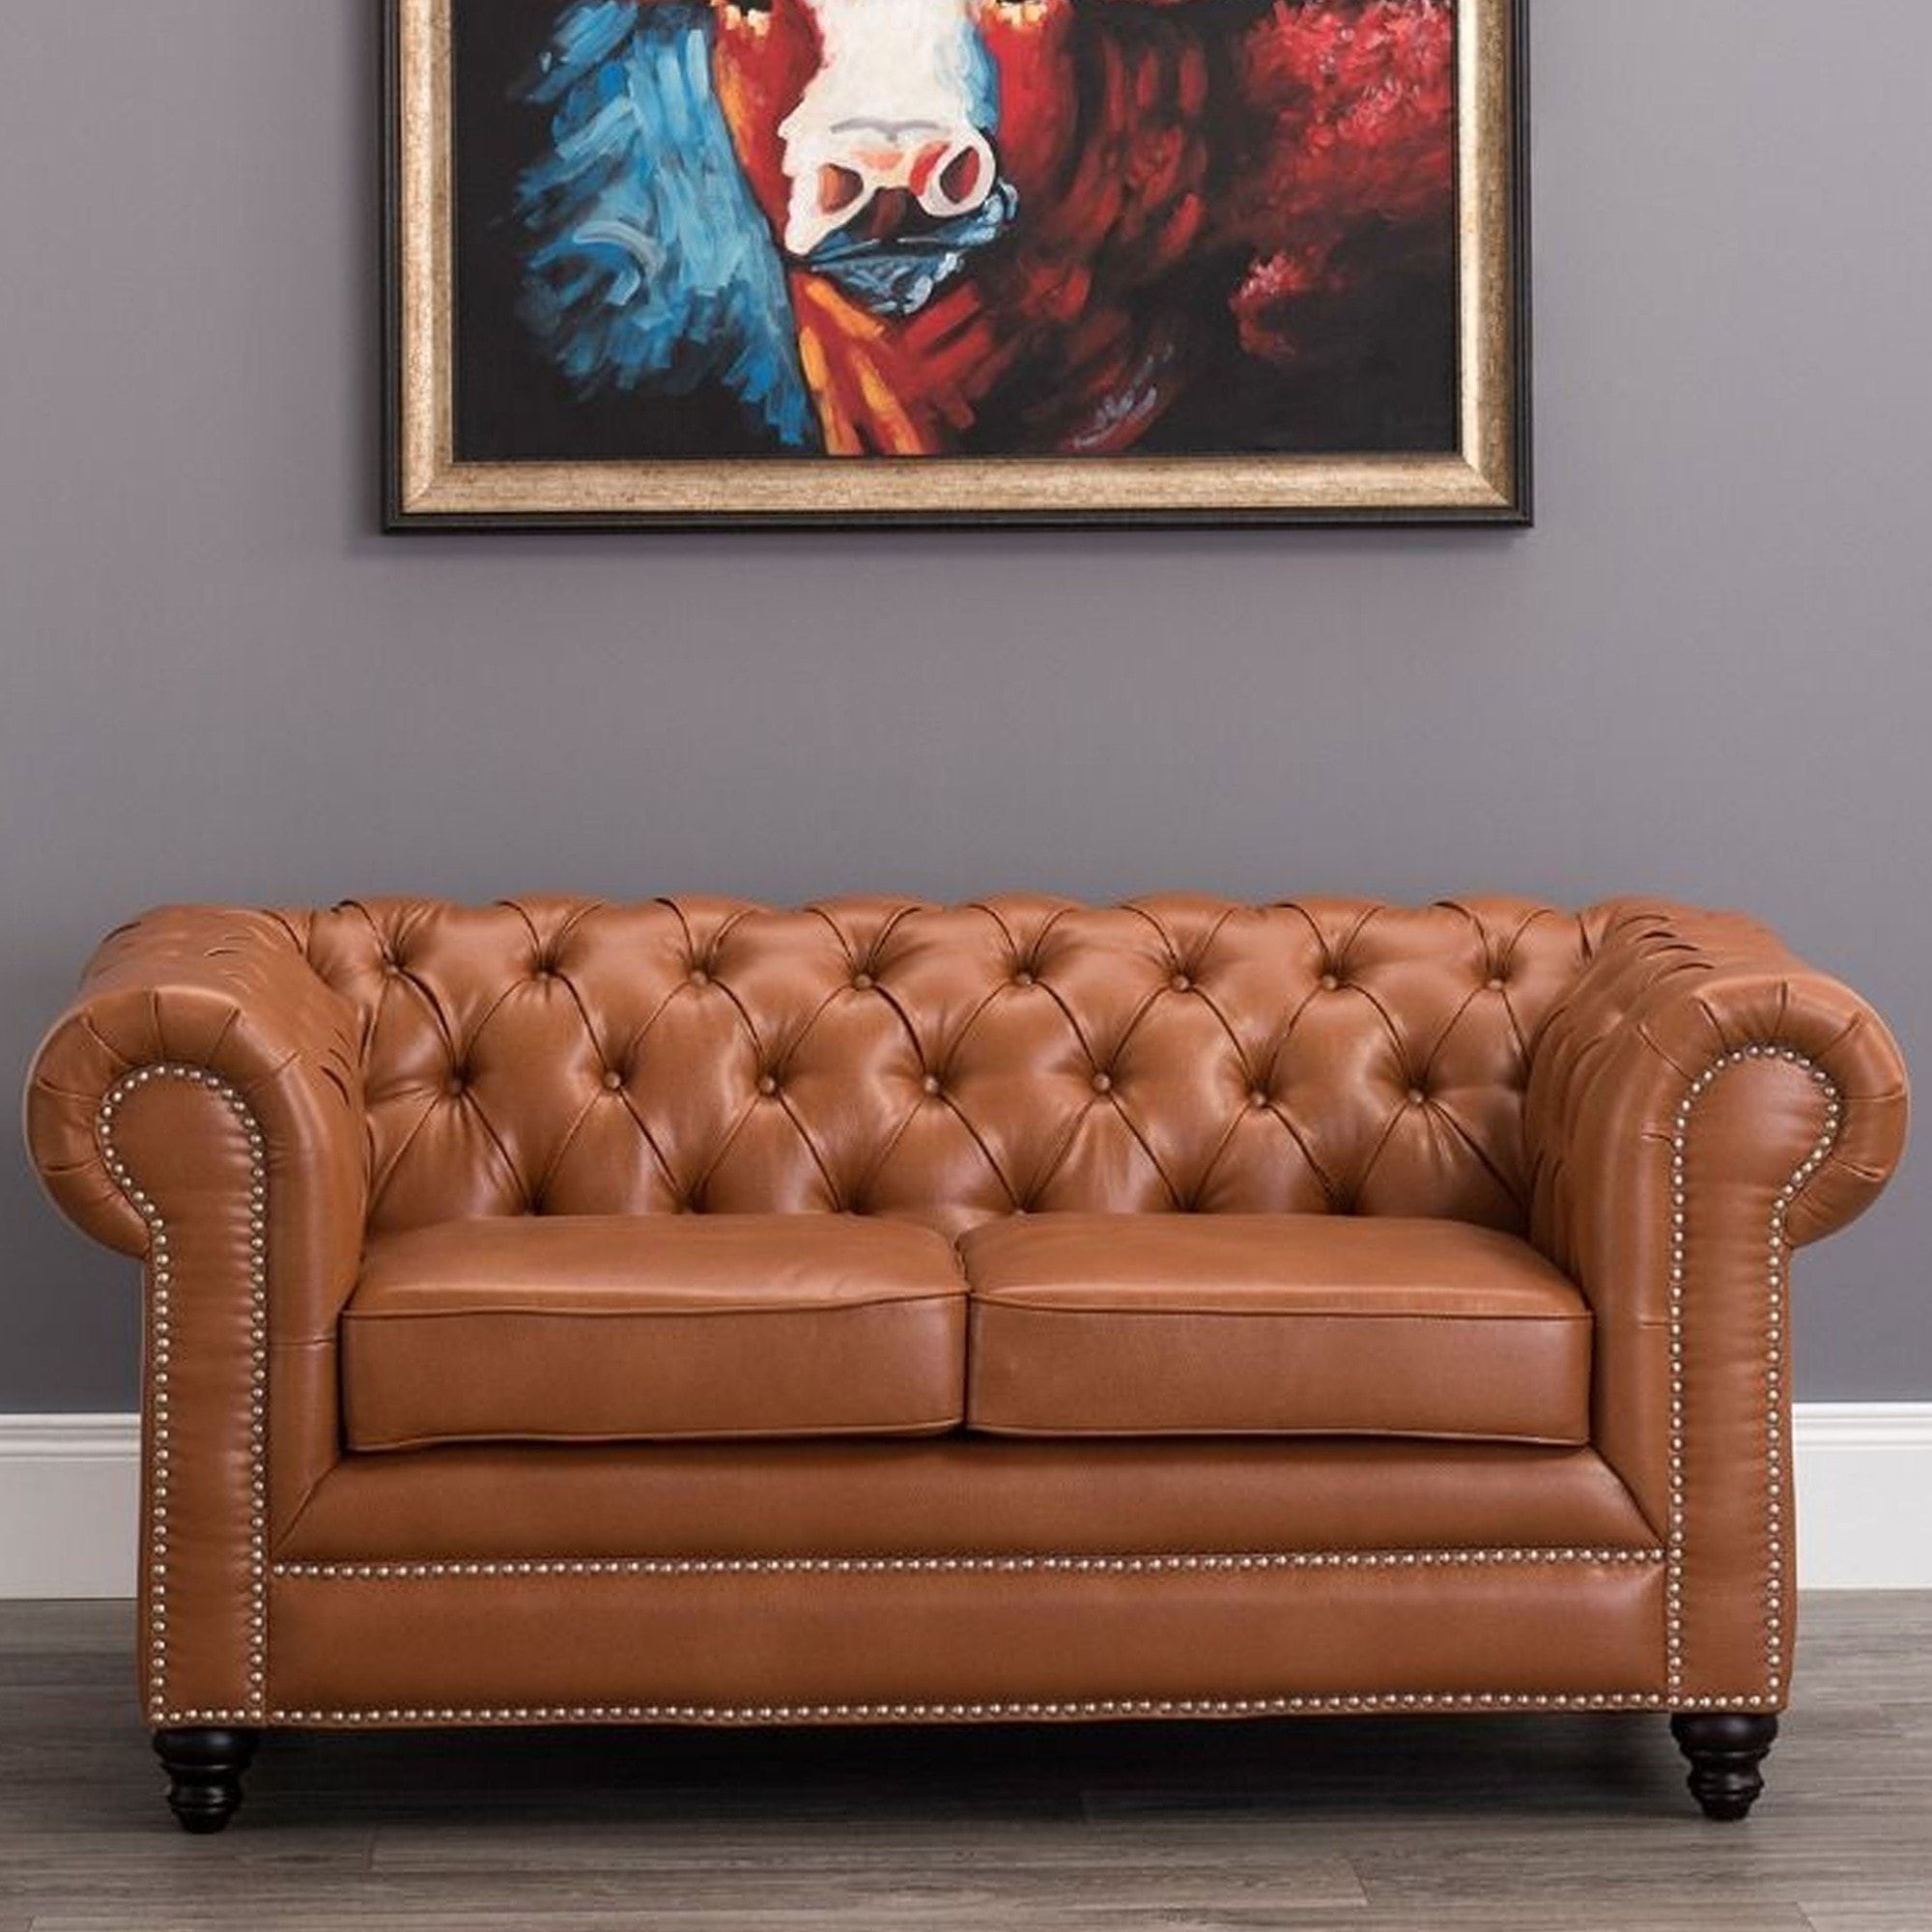 Faux Leather Chesterfield 2 Seater Sofa Tan | Tan Chesterfield Sofa Inside Faux Leather Sofas (View 17 of 21)